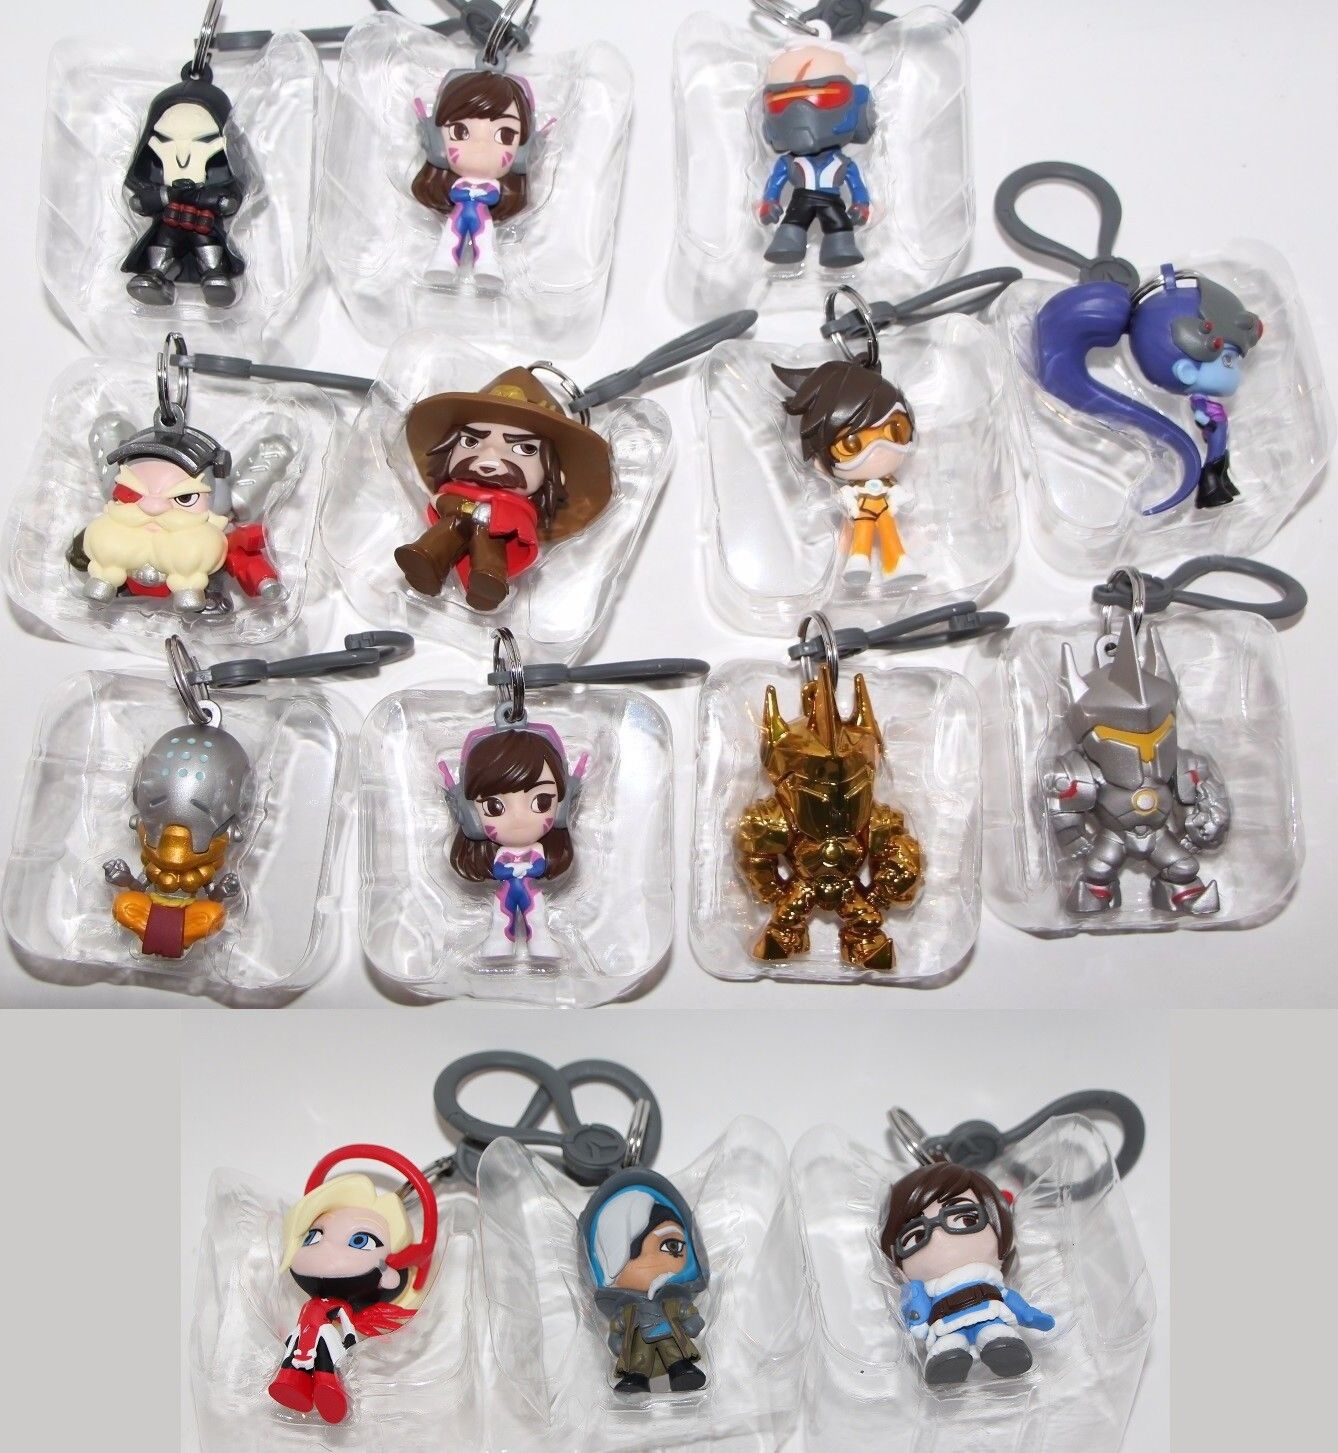 BLIZZARD BLIZZCON 2017 OVERWATCH BACKPACK HANGER KEYCHAIN YOU PICK YOUR FIGURE Blizzard Entertainment